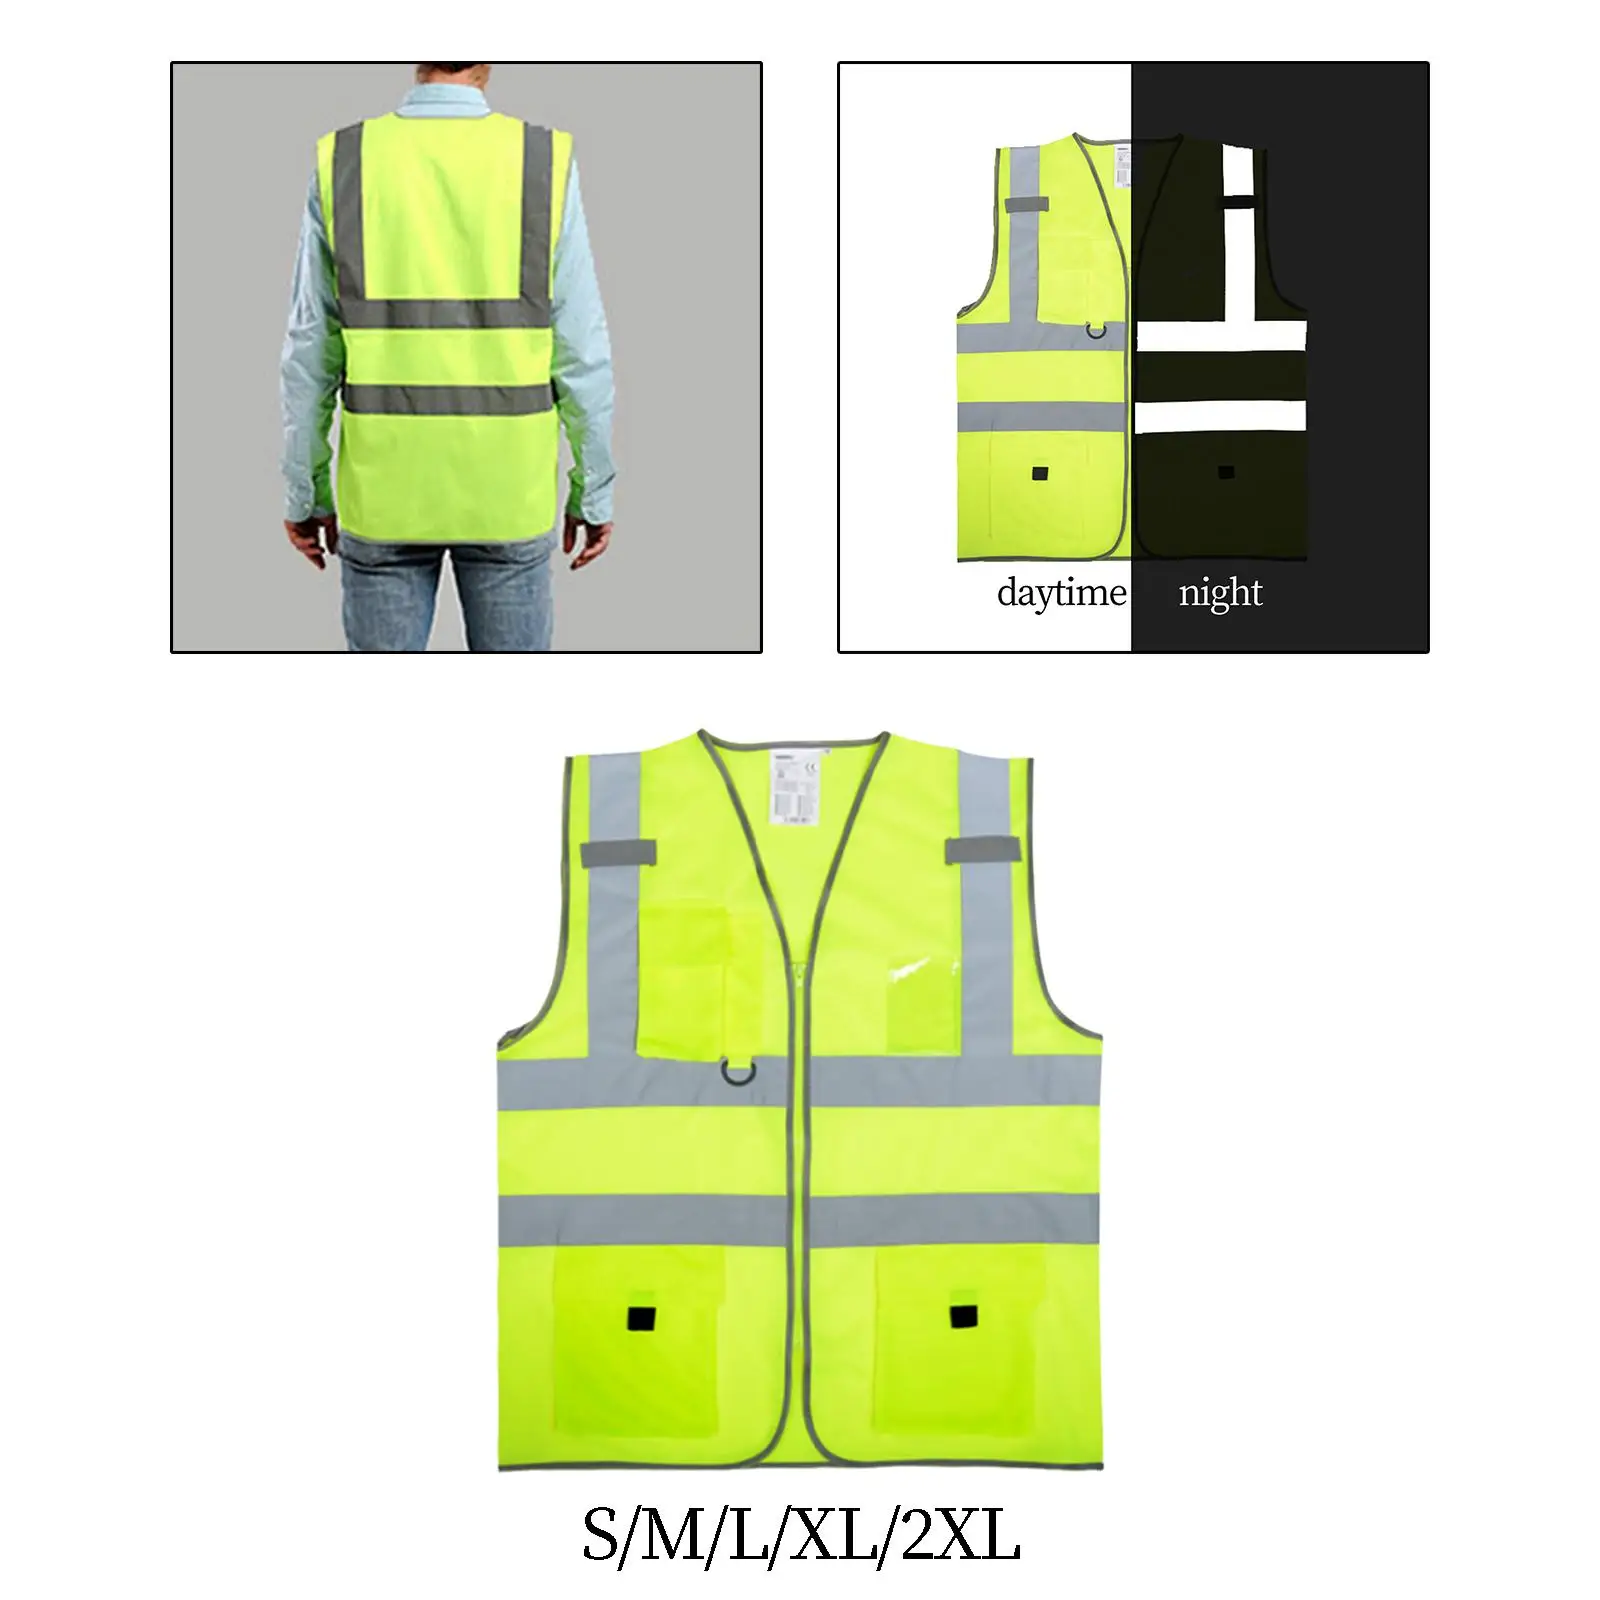 Reflective Vest Multi Pocket Reflective Safety Jacket Construction Vest for Construction Outdoor Workers Racing Running Sports